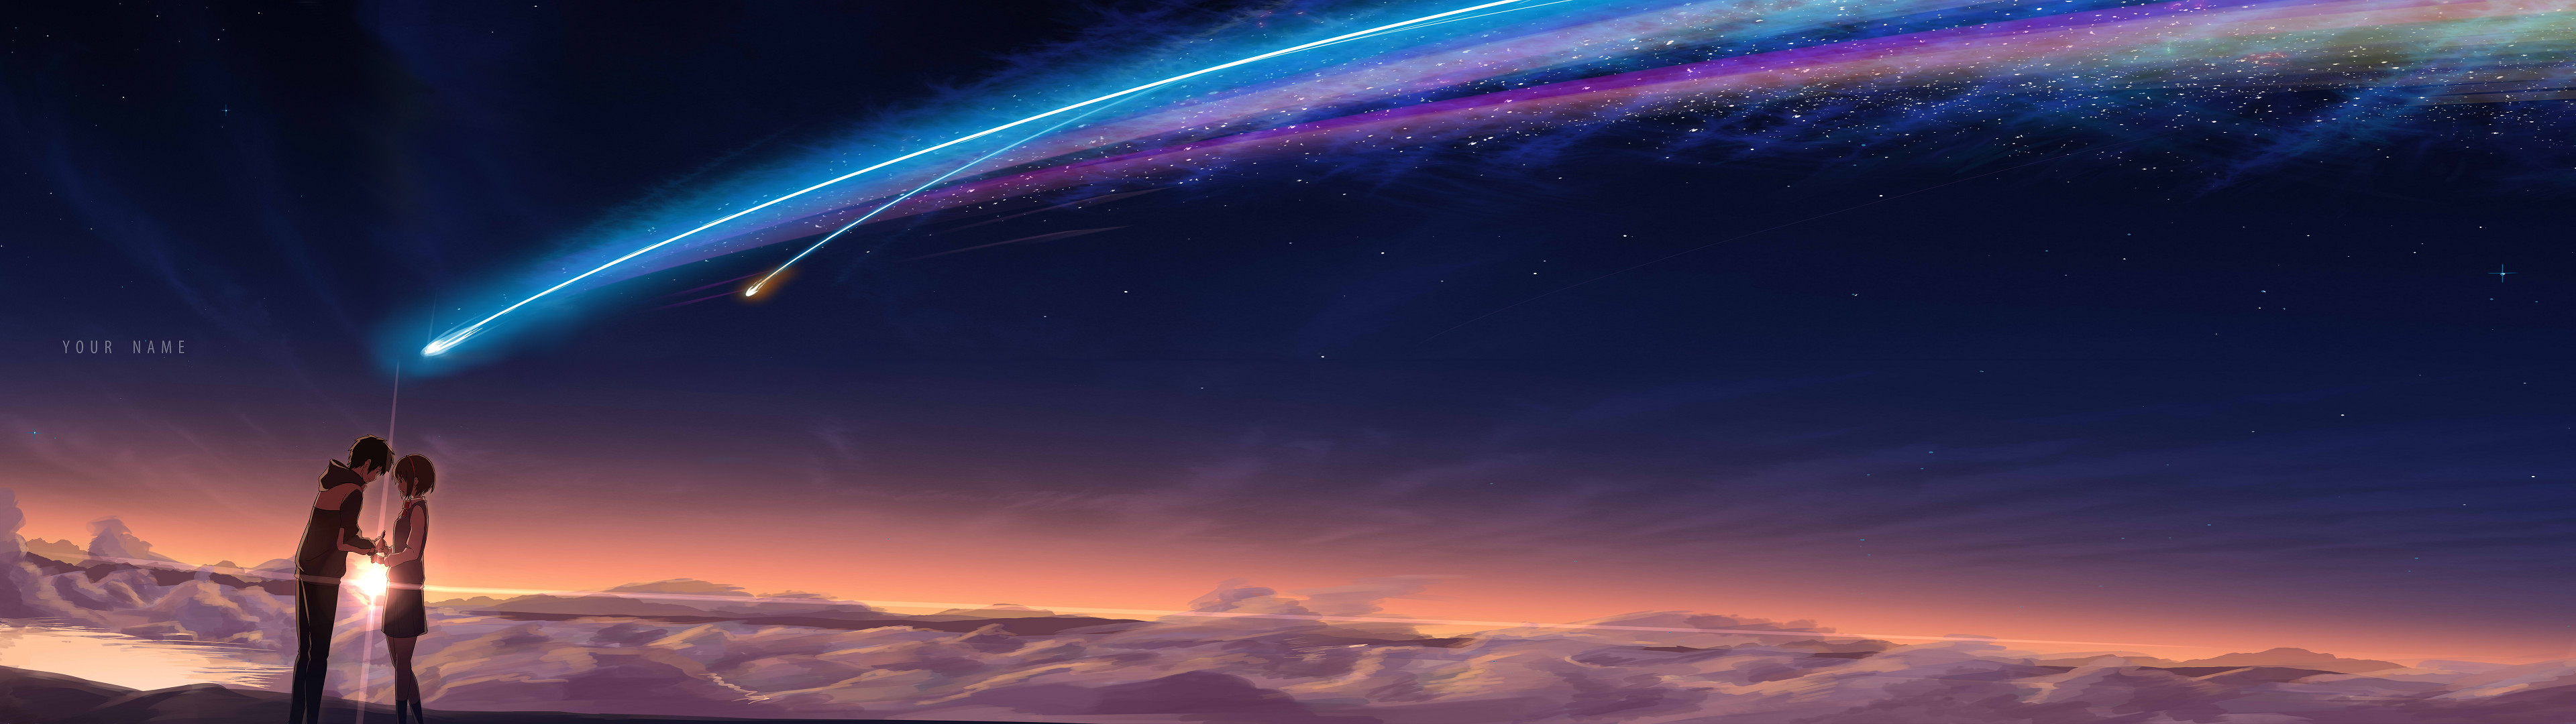 3840x1080 [] Kimi no na wa. Your Name. Hastily done dual monitor edit of a  widely available wallpaper.Dual ...